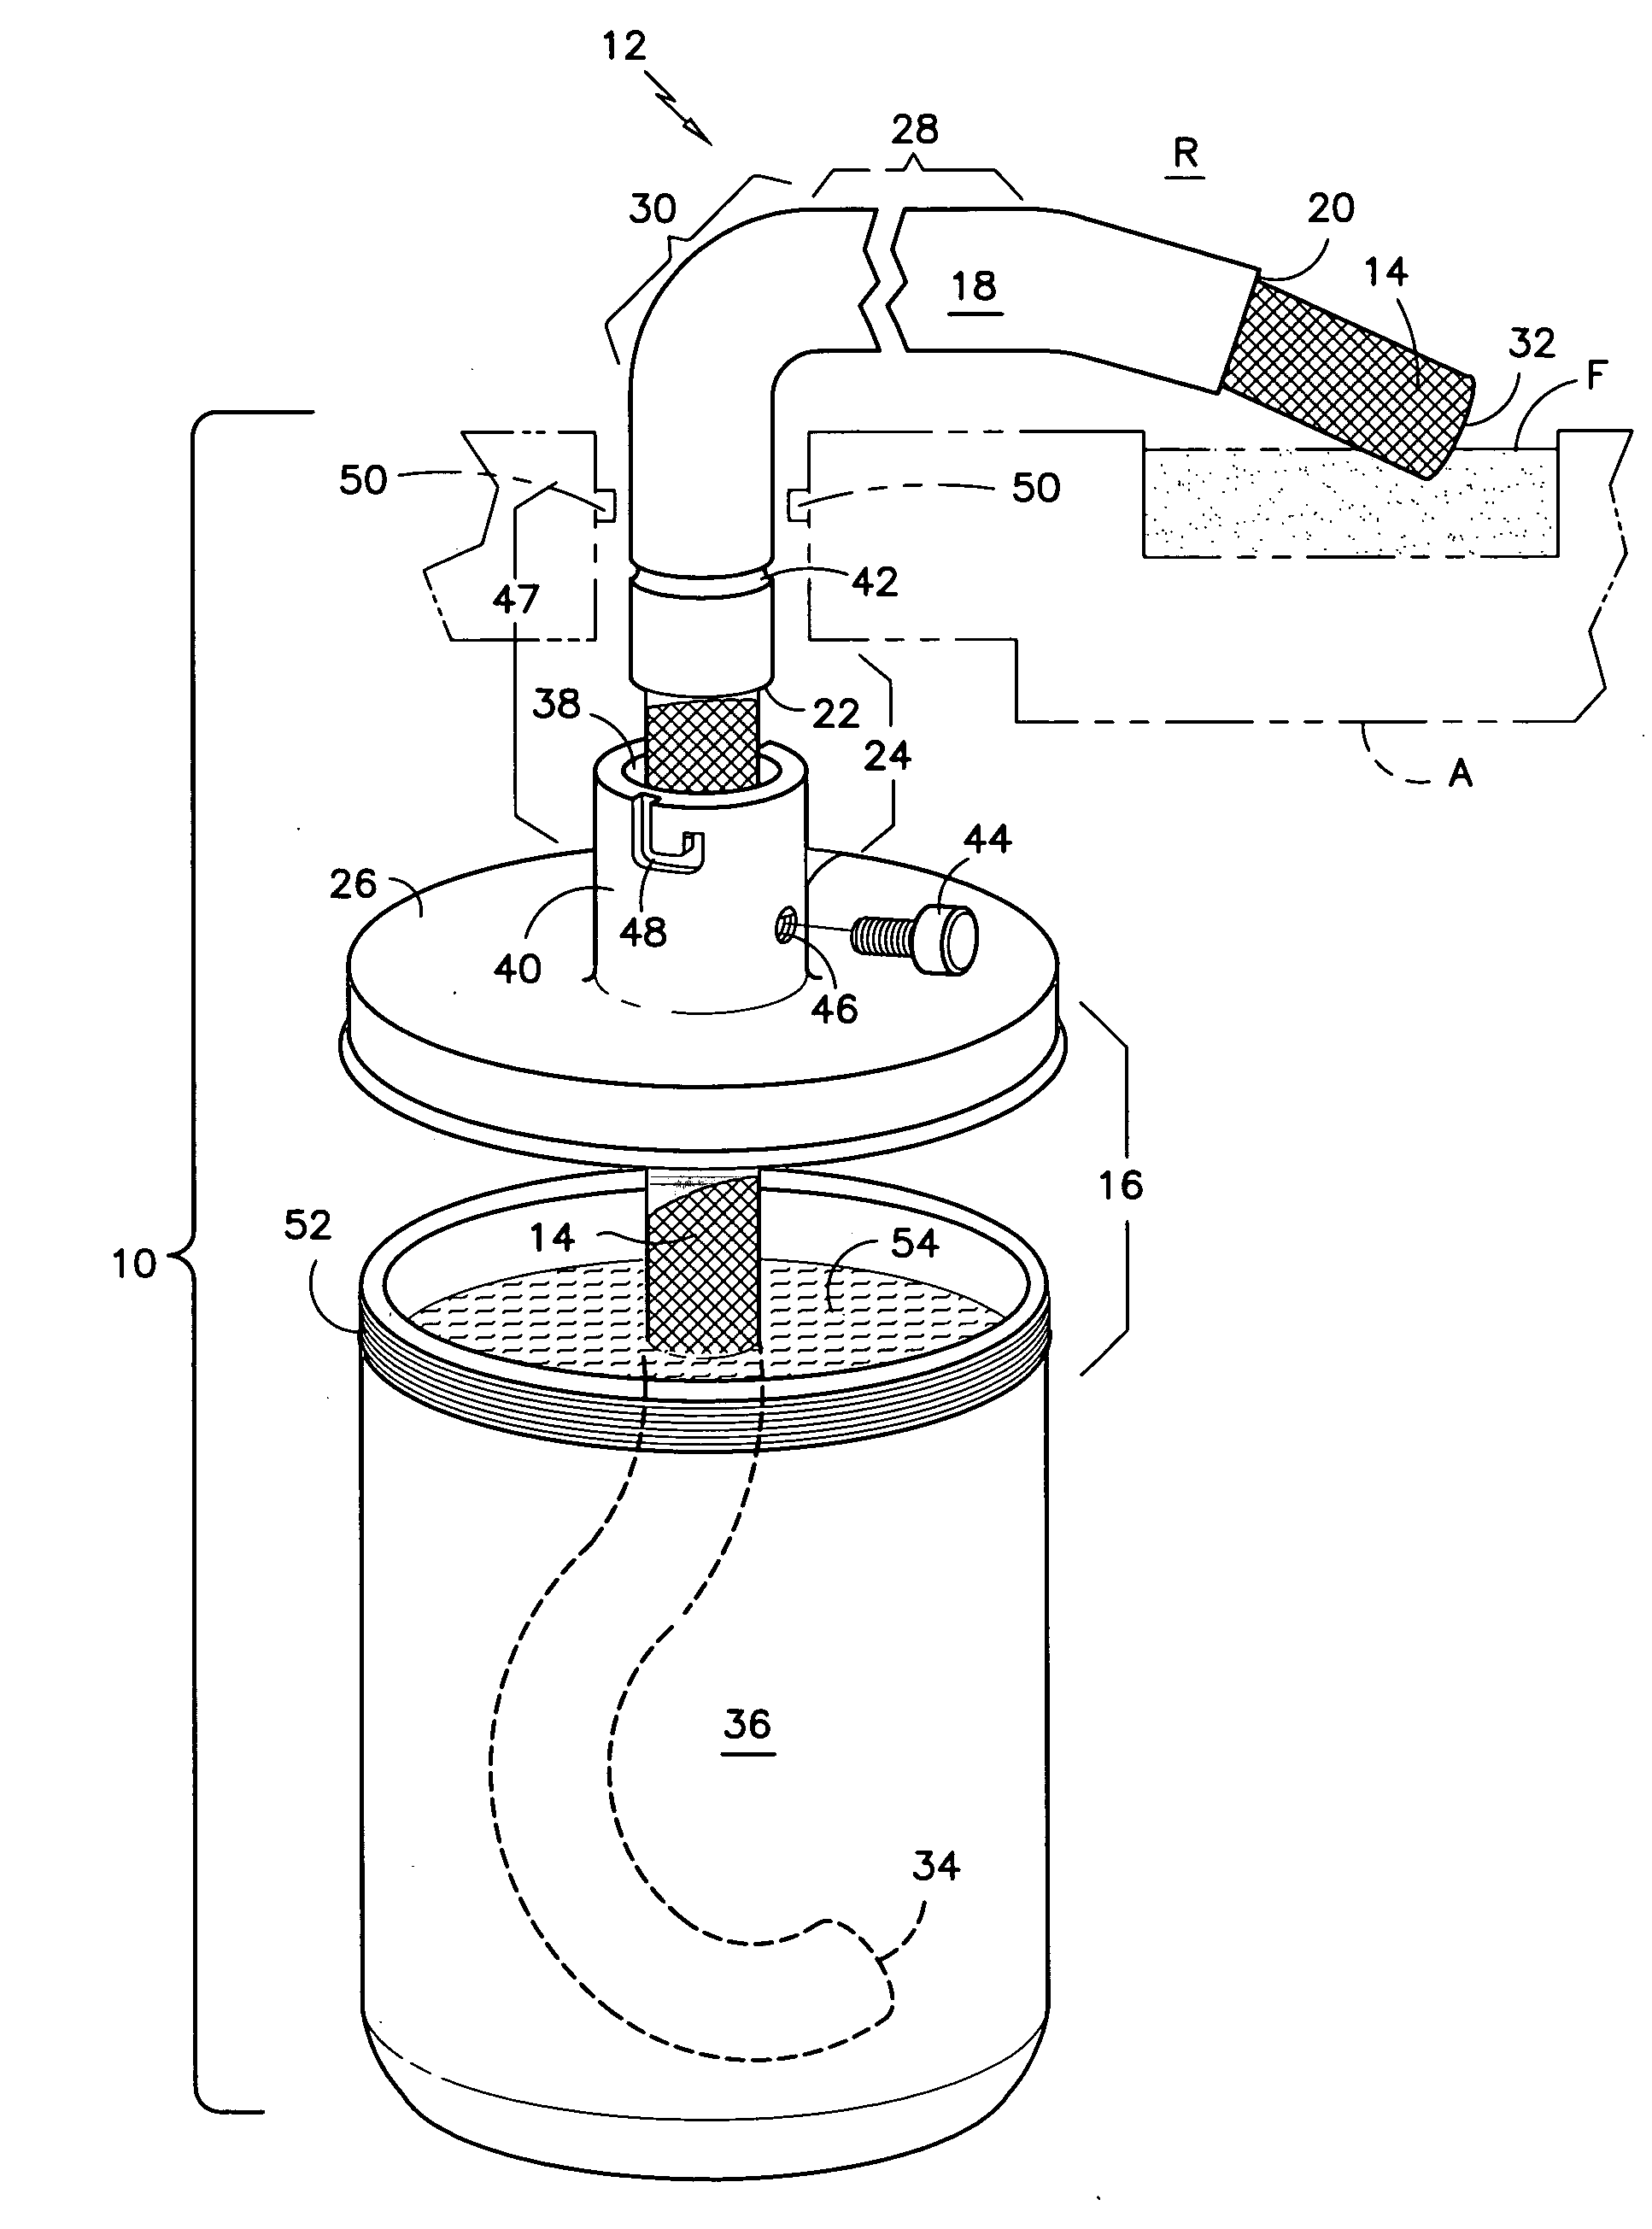 Apparatus and methods for removing a fluid from an article